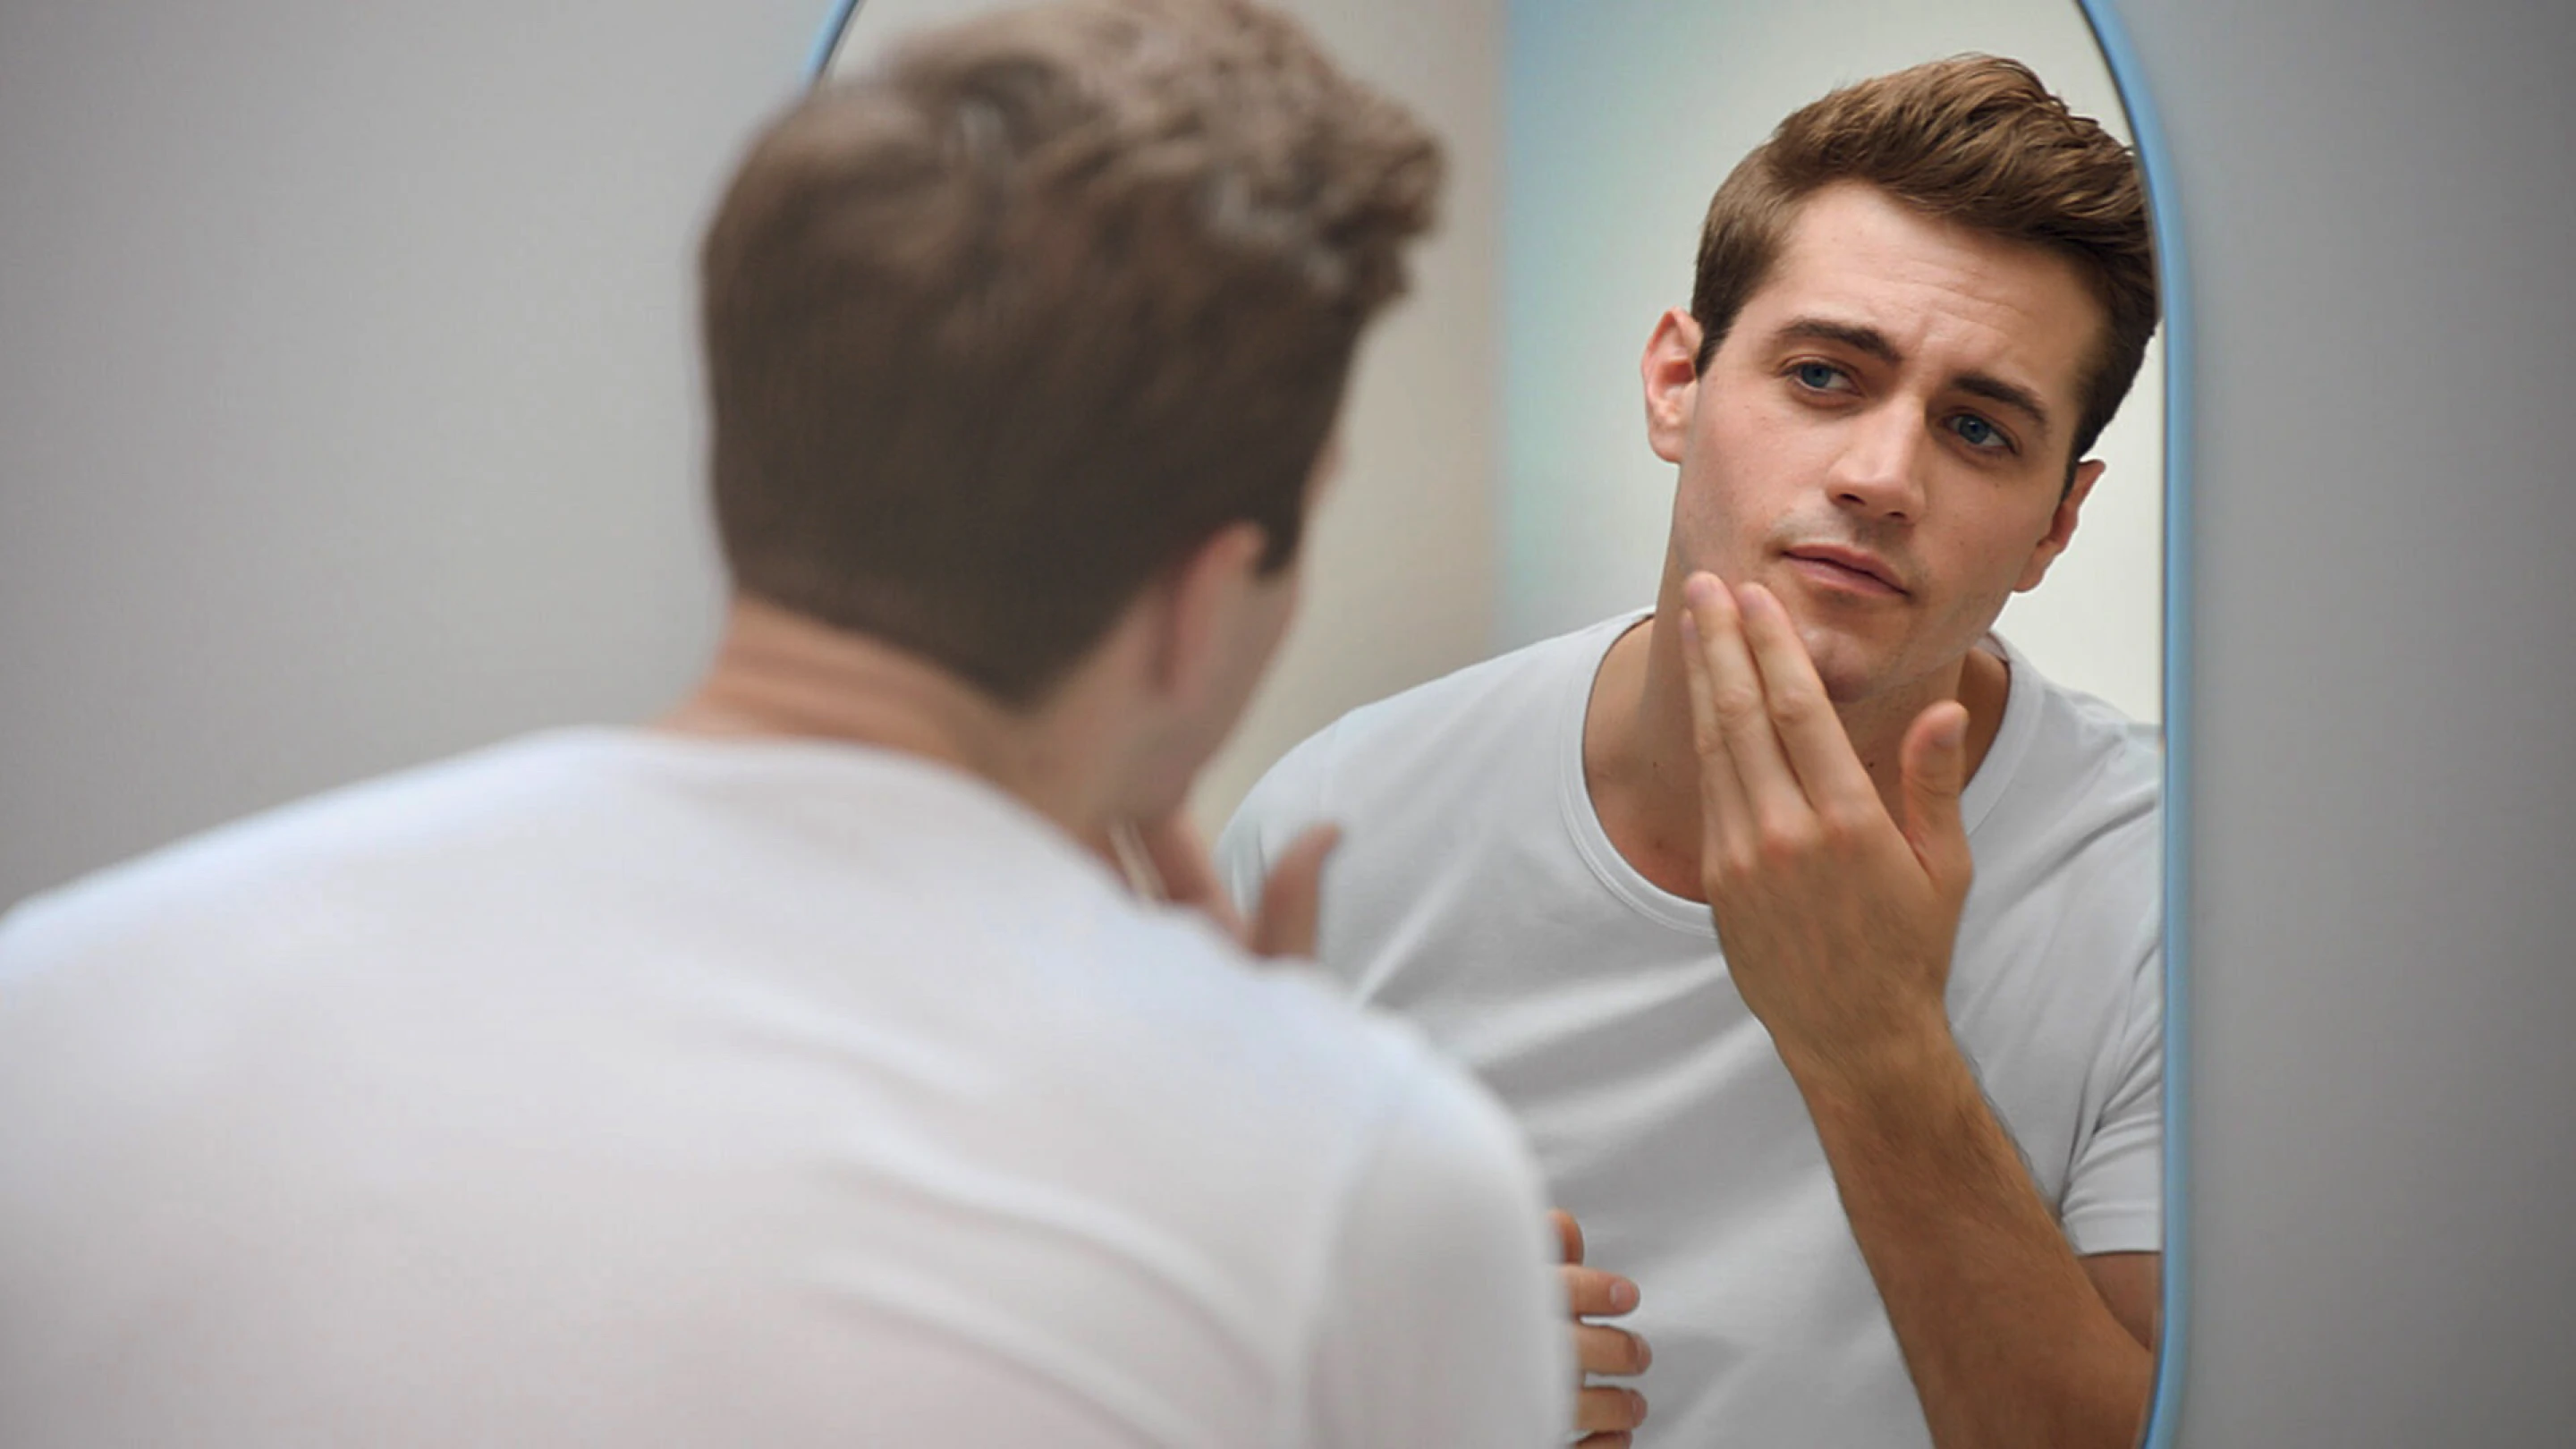 Man is looking at himself in the mirror, his silhouette is blurred while the mirror image is clear. He seems content and is about to touch his face.